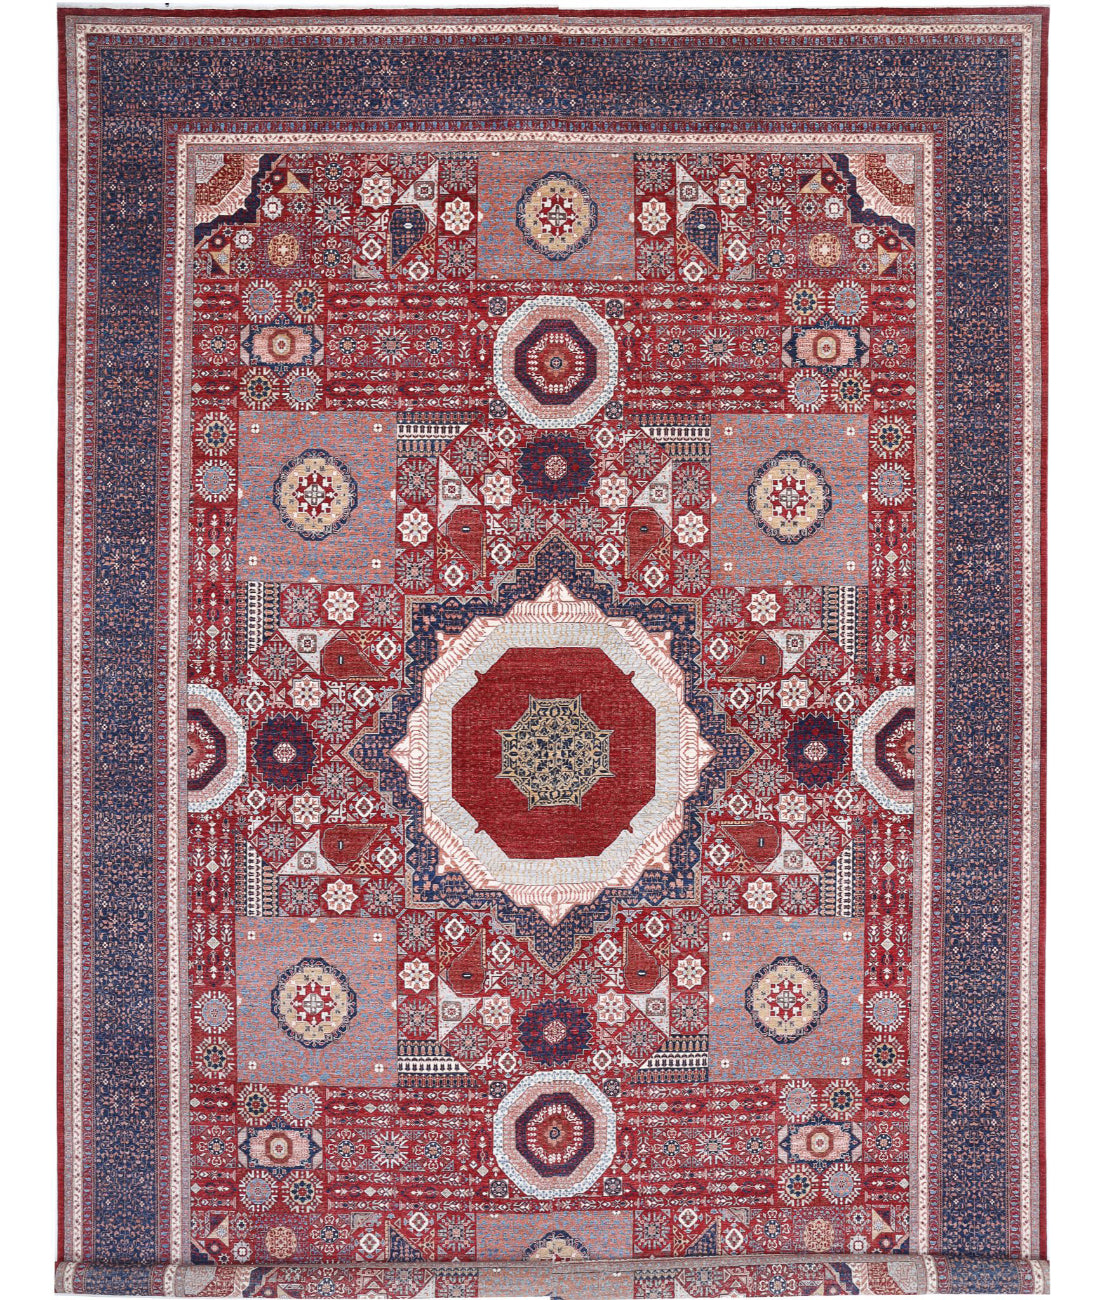 Hand Knotted Mamluk Wool Rug - 16'5'' x 24'5'' 16'5'' x 24'5'' (493 X 733) / Red / Blue